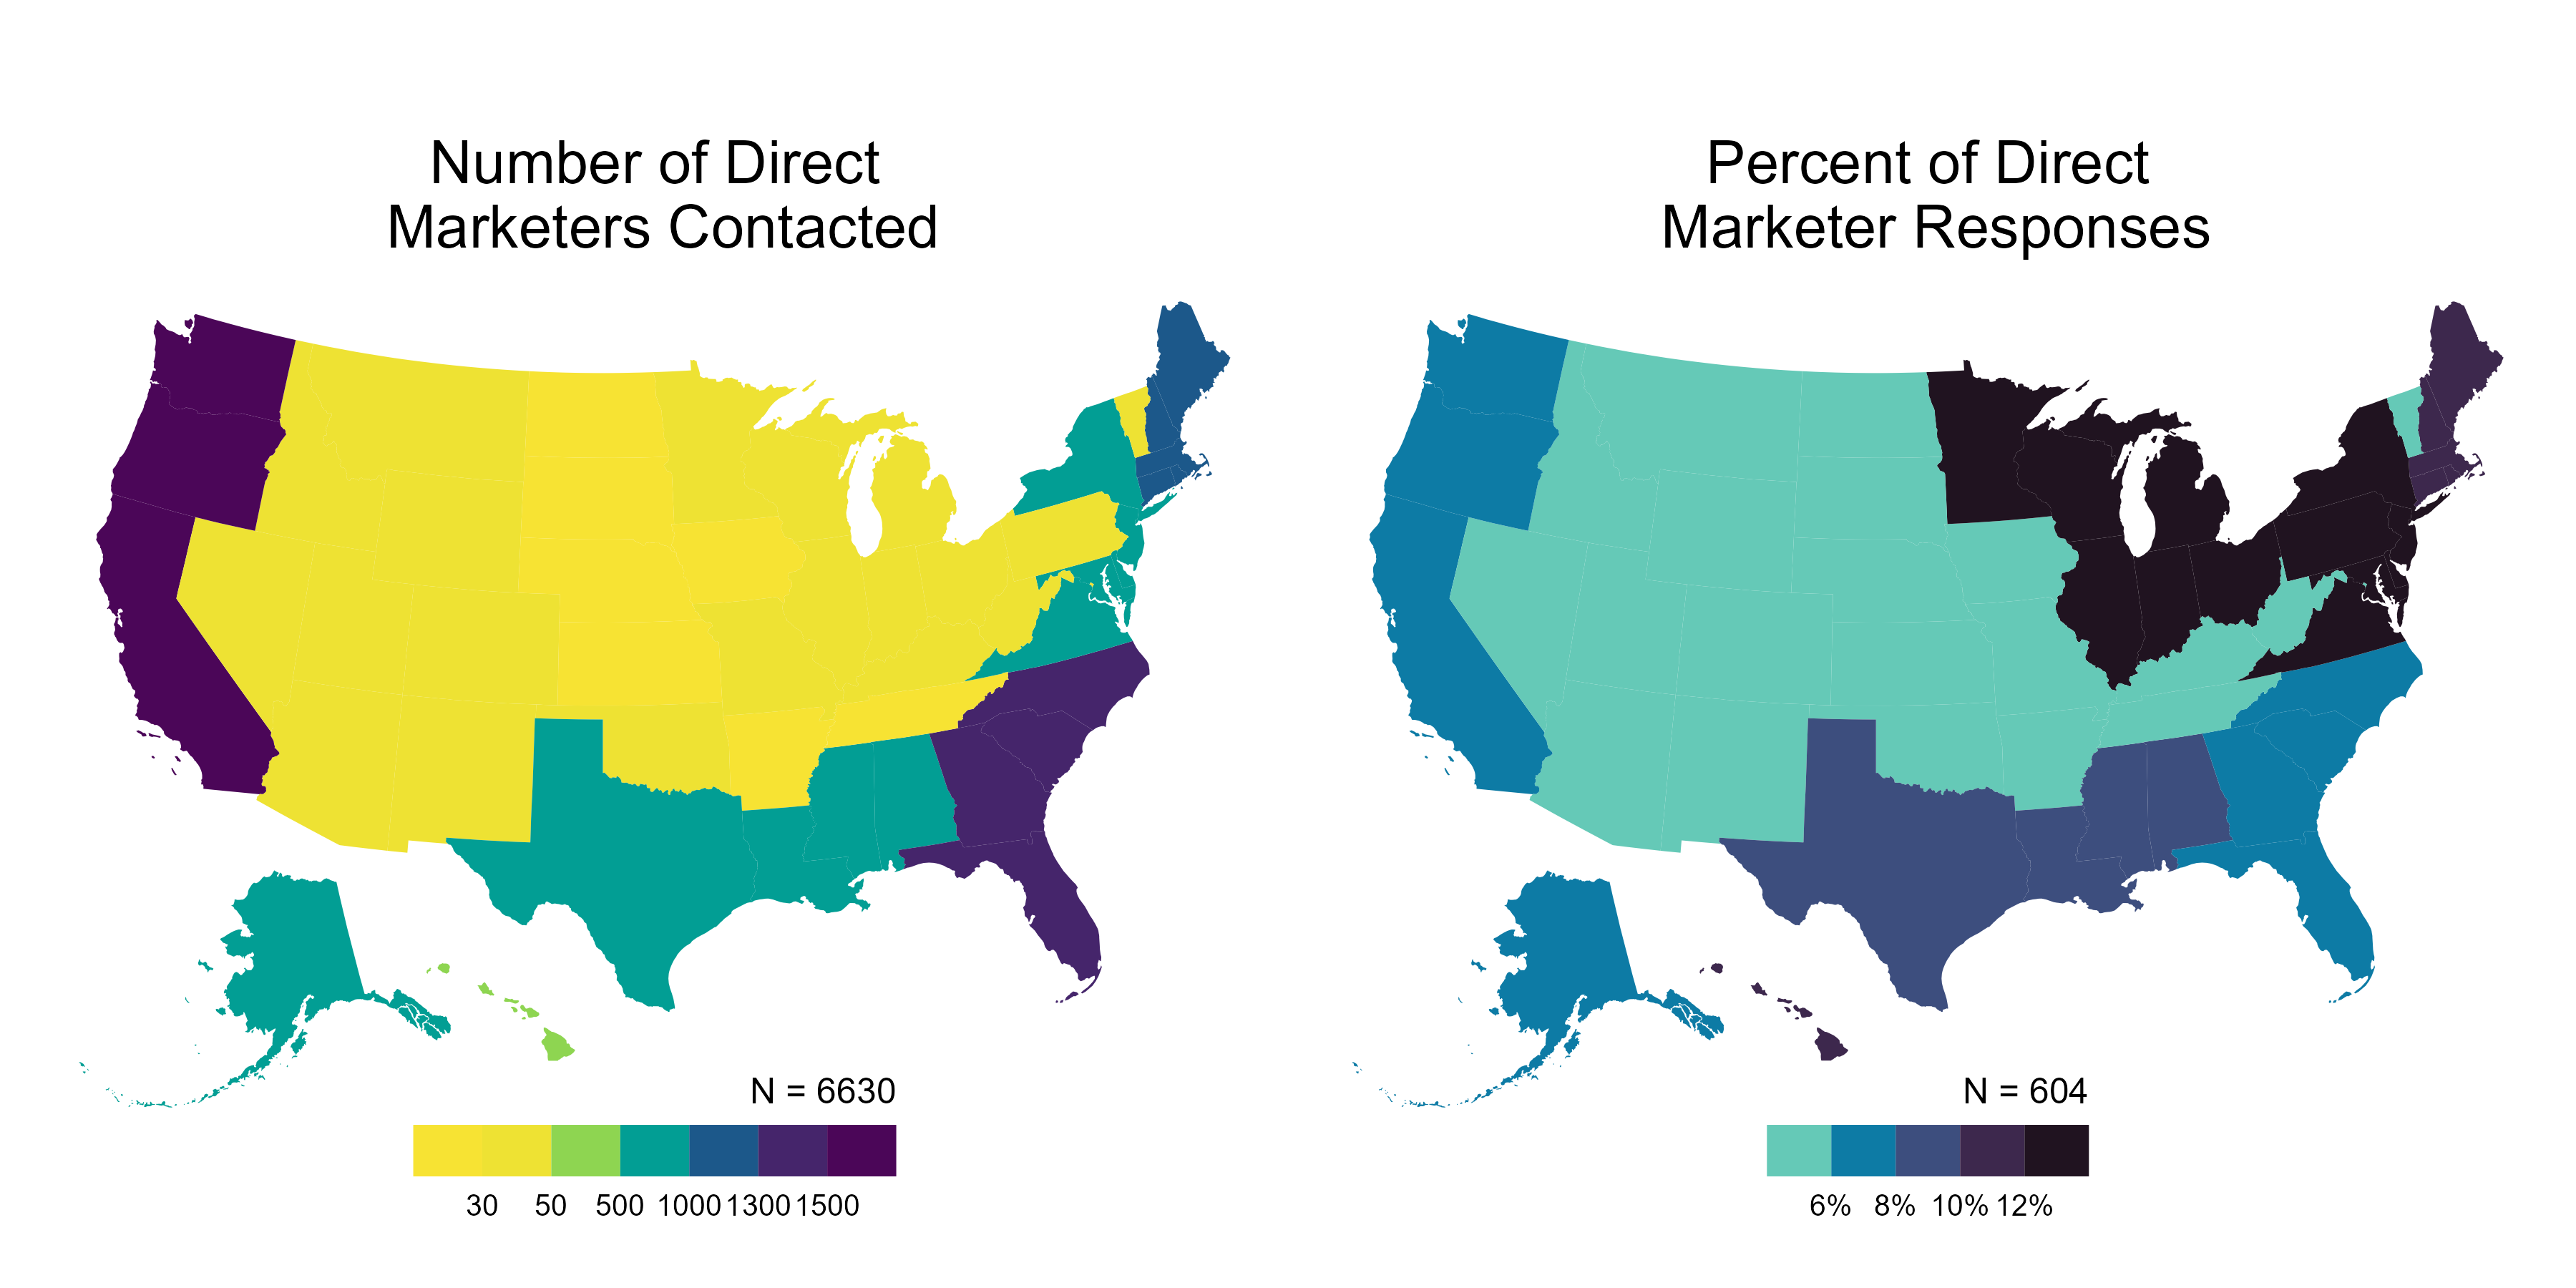 Two maps of the United States depict the regional numbers of direct seafood marketers who were contacted for the survey and the regional percentage of direct seafood marketers who responded.